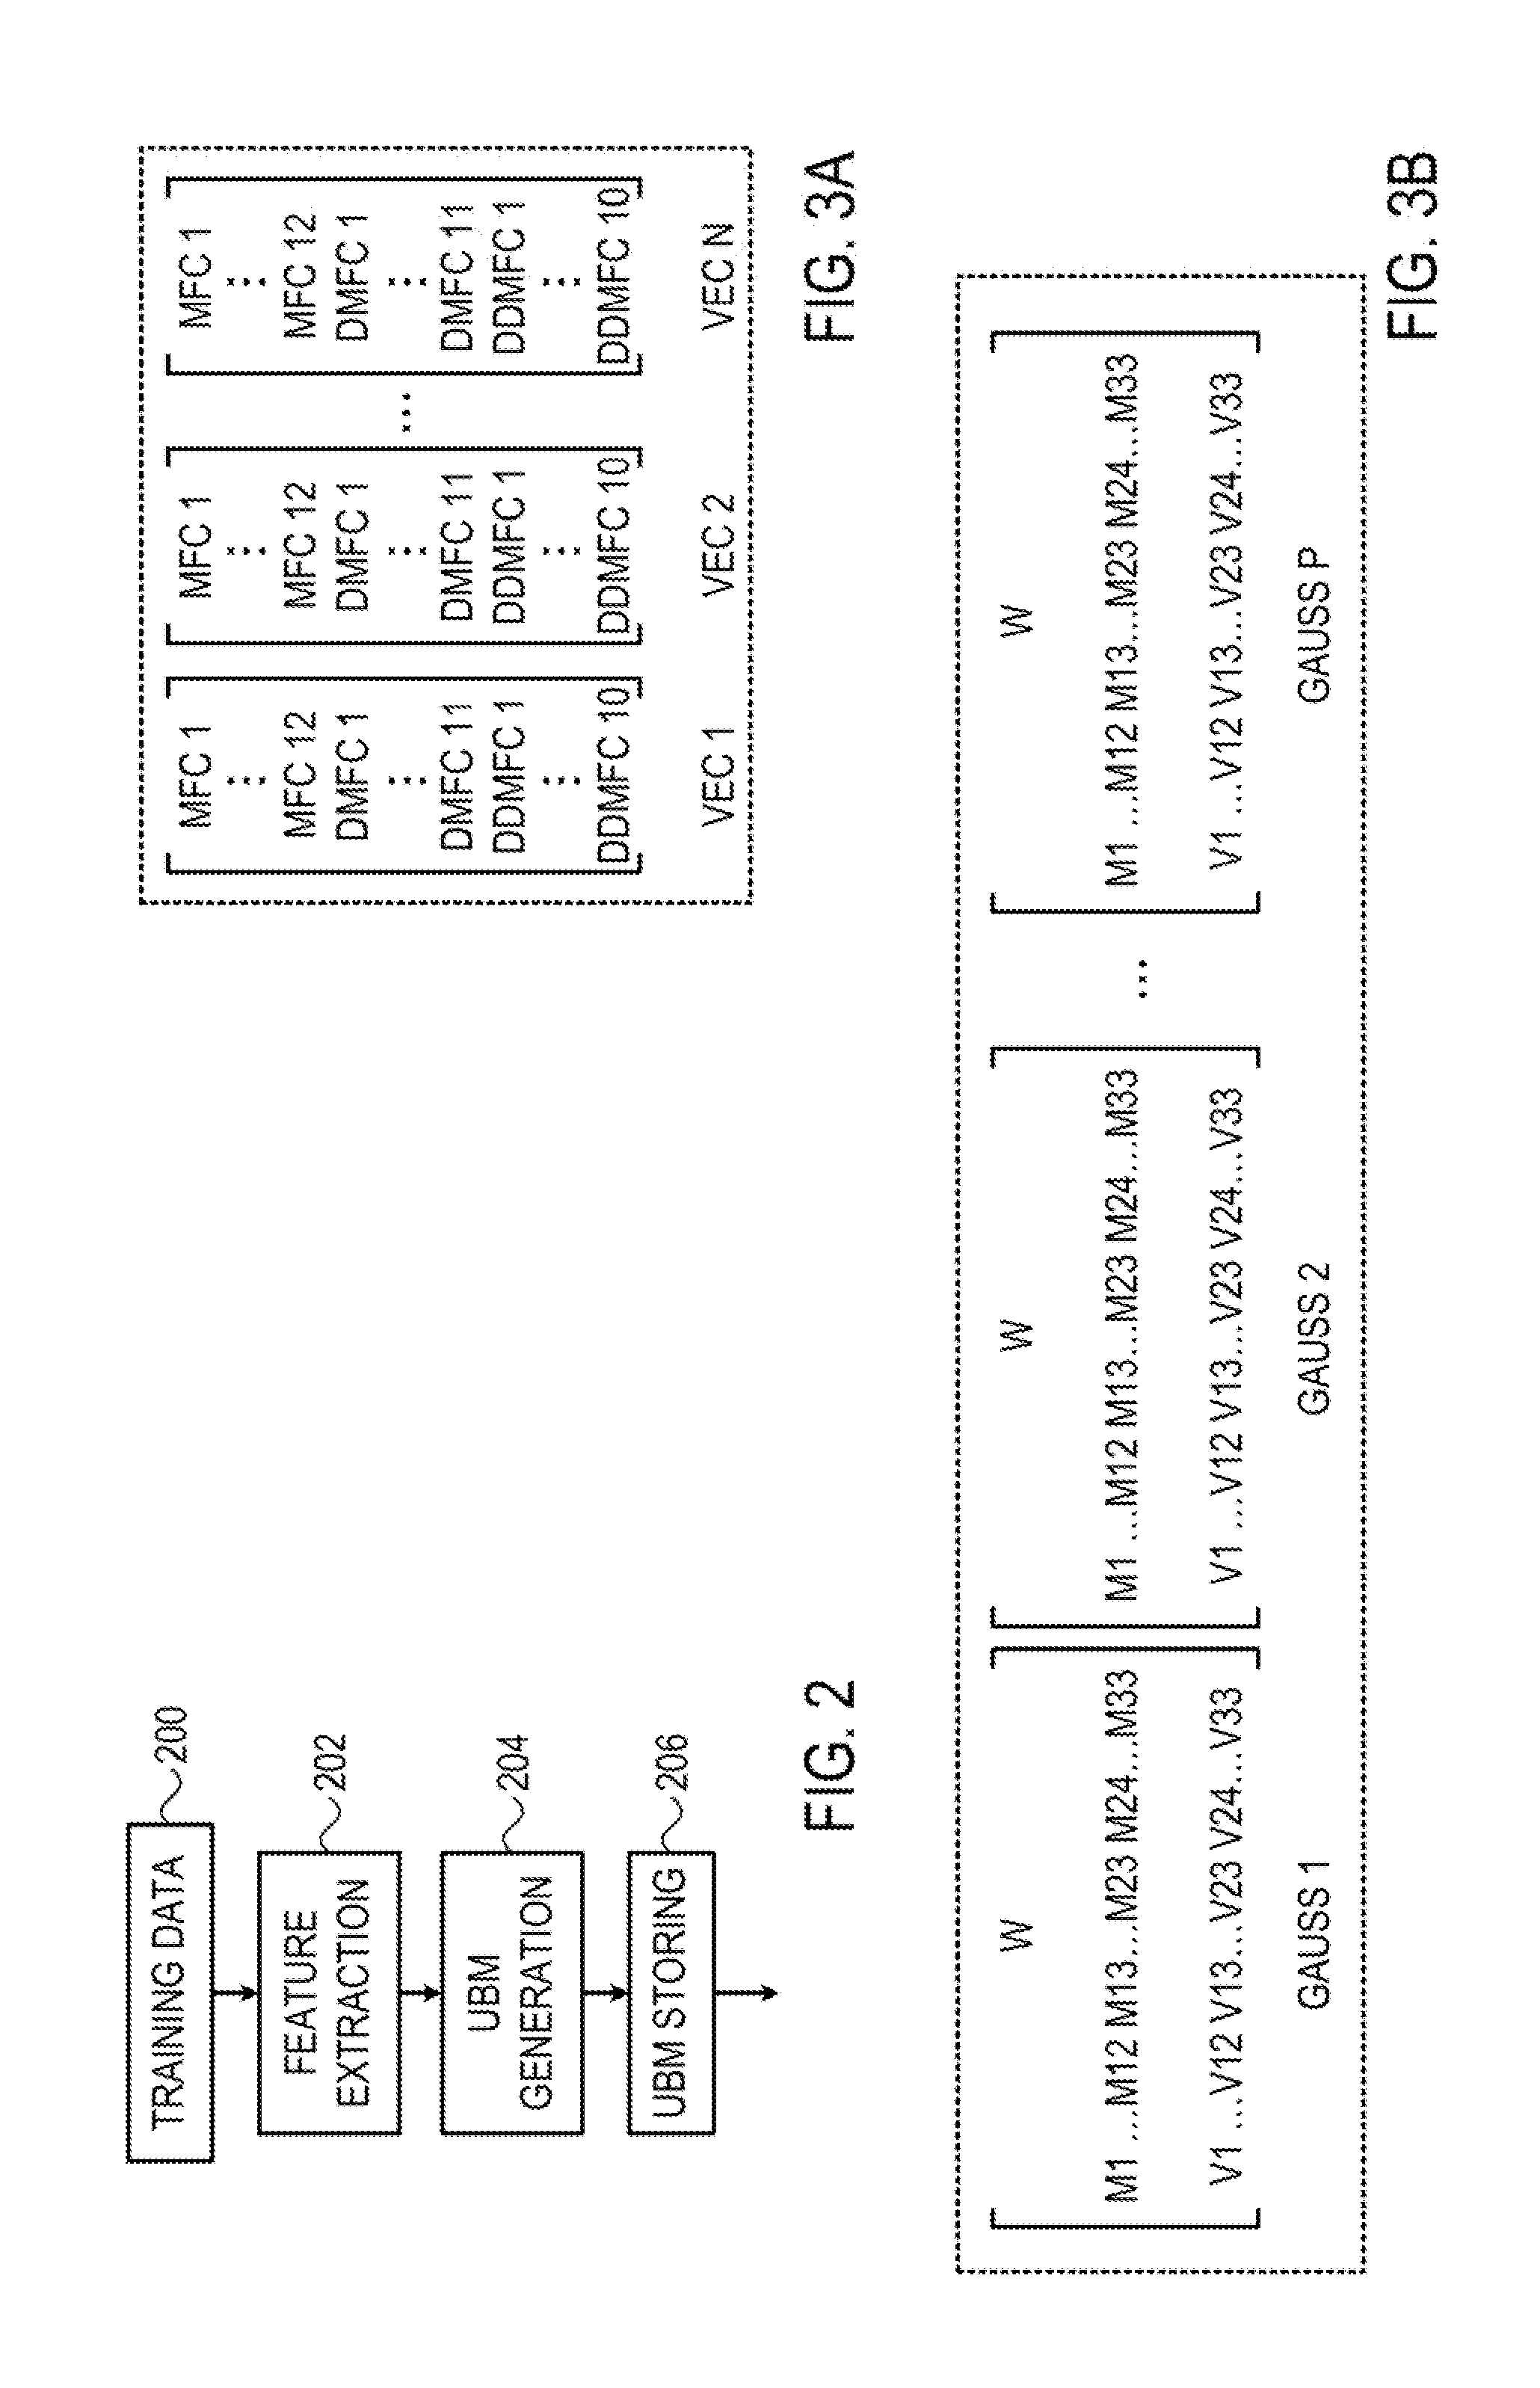 Method and apparatus for real time emotion detection in audio interactions